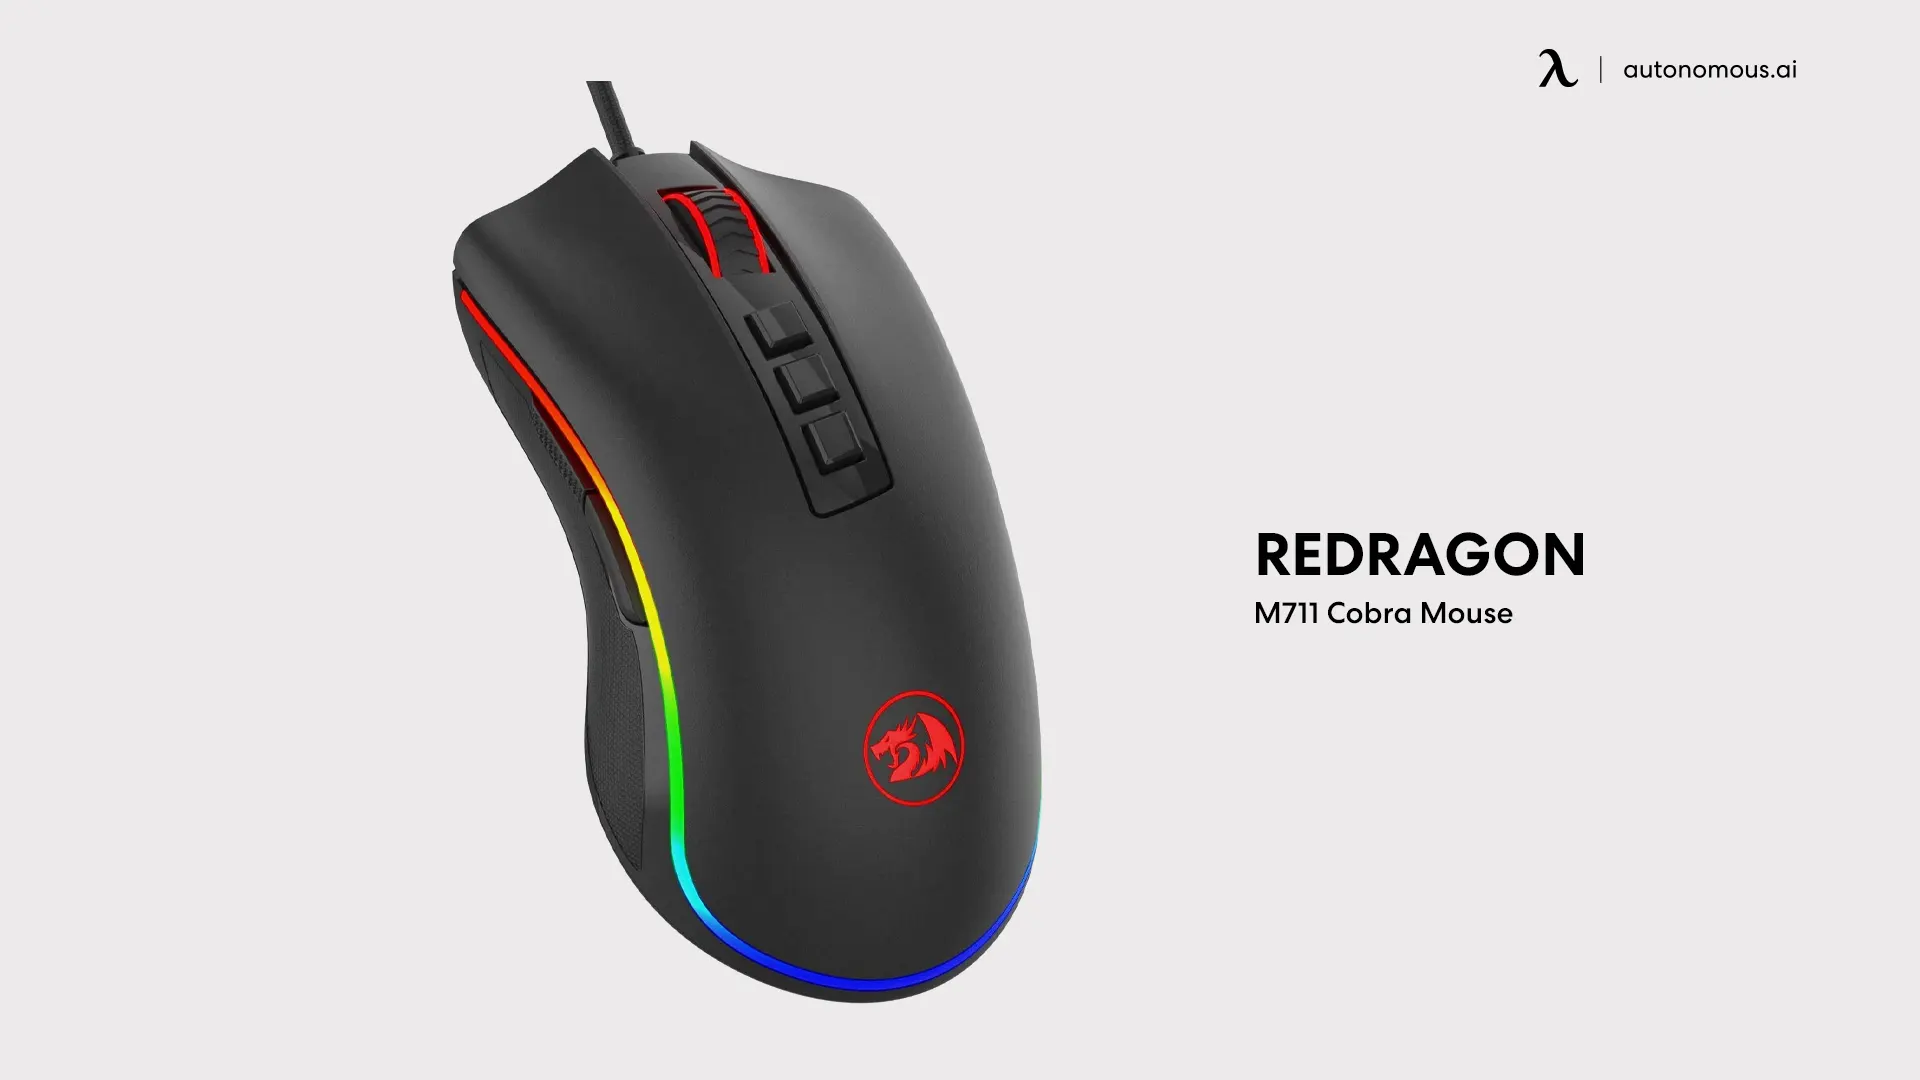 Redragon M711 Cobra Mouse - gaming mouse for small hands